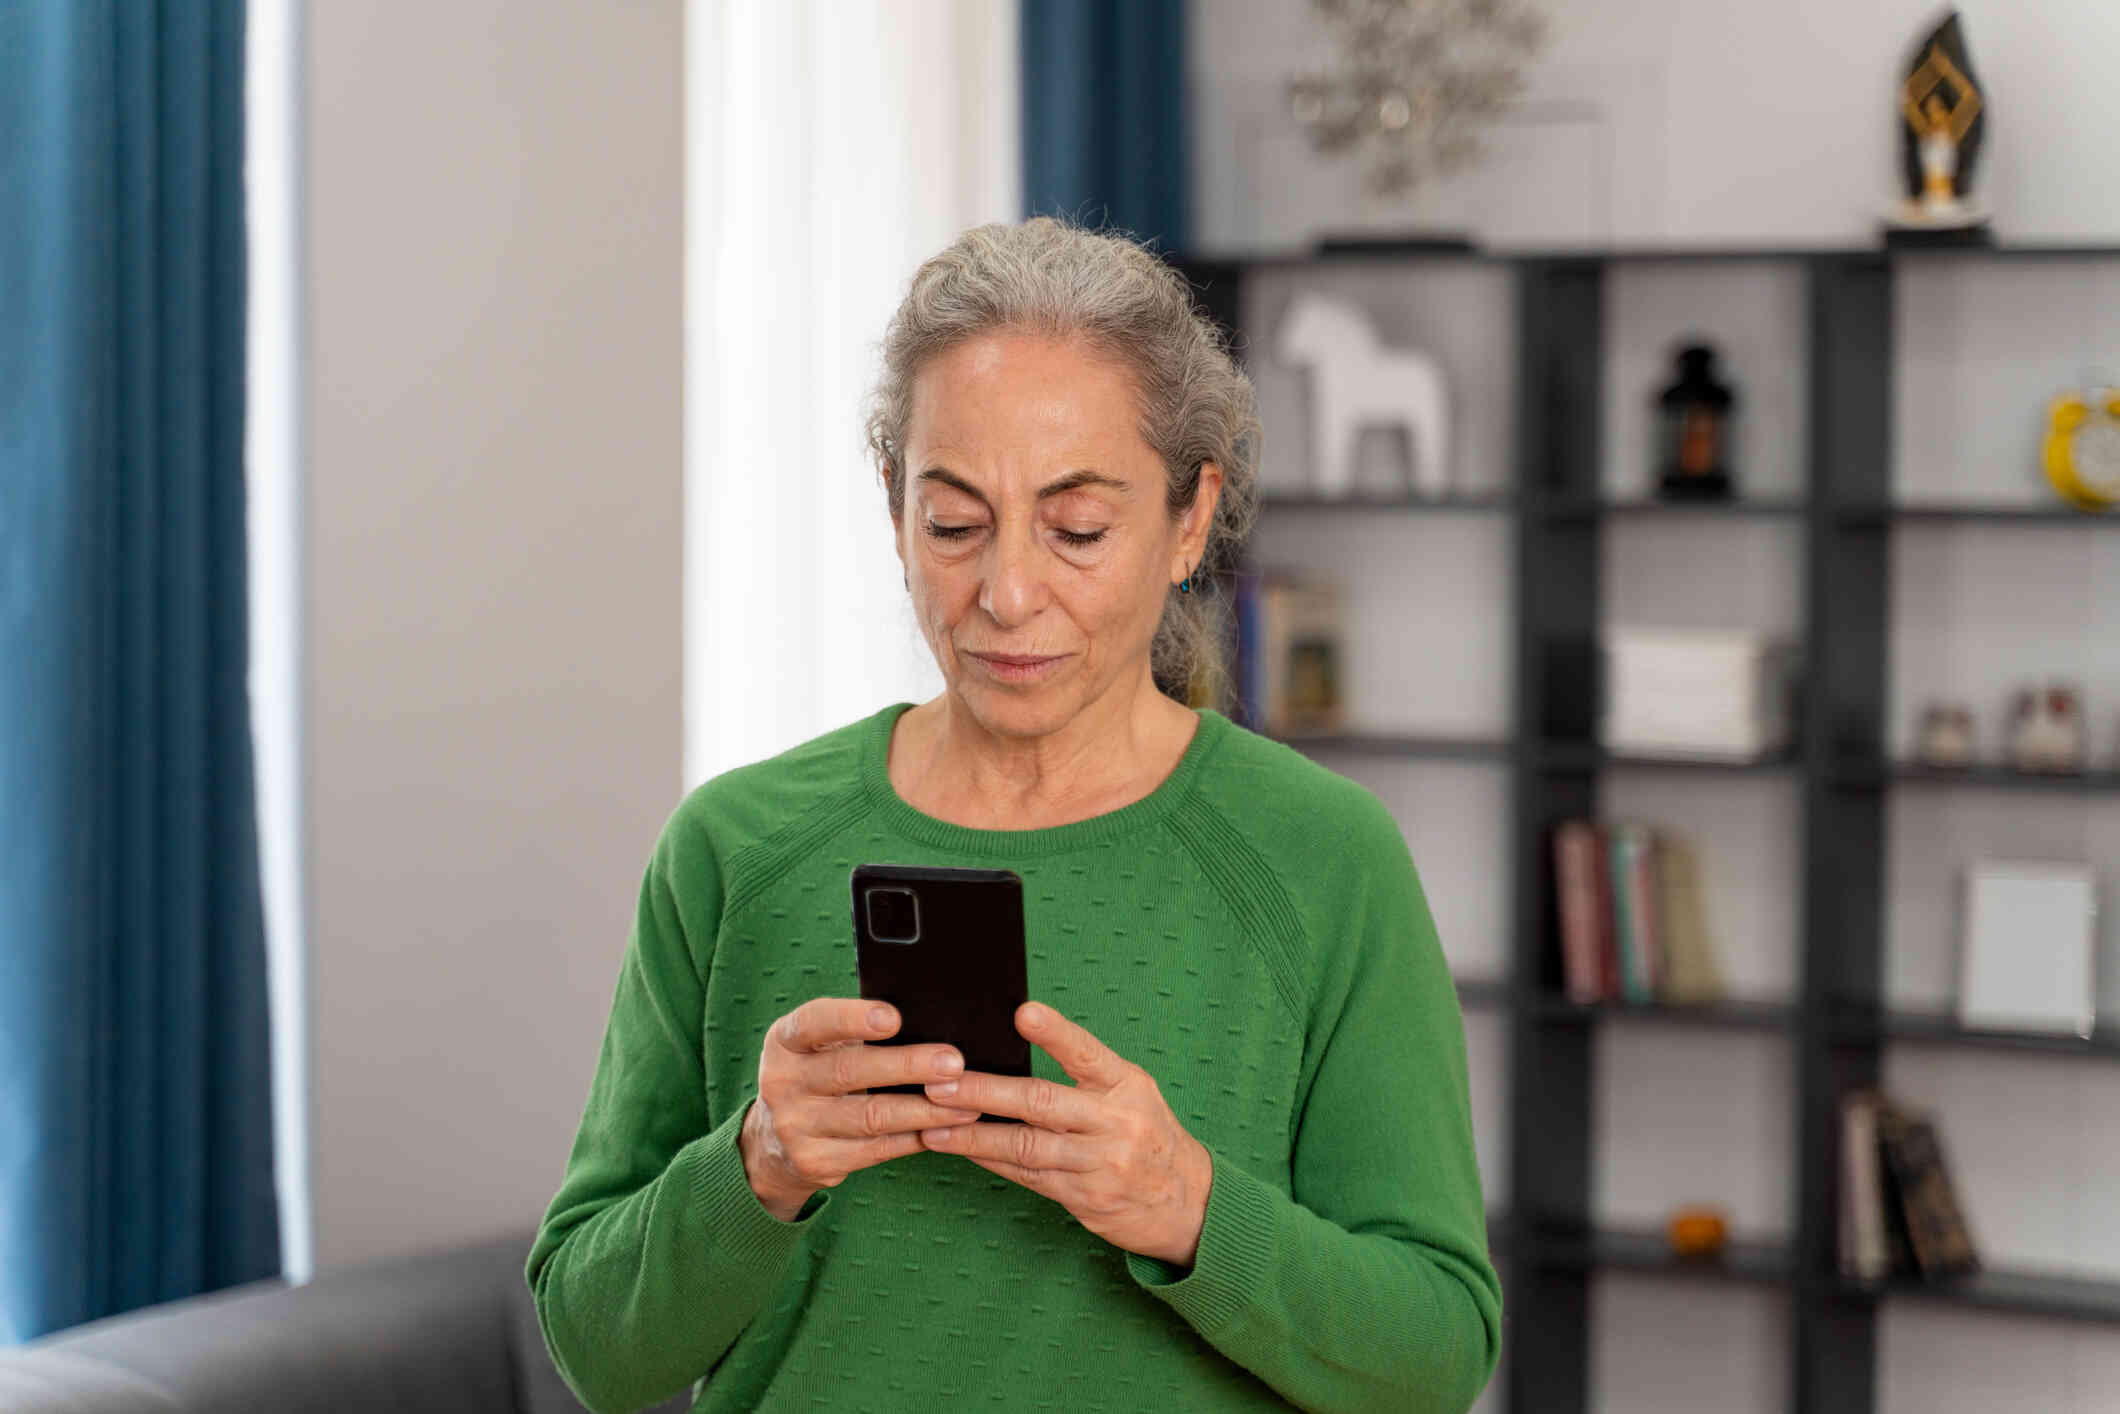 A mature woman in a green sweater stands in her home and looks down at the phone in her hand.